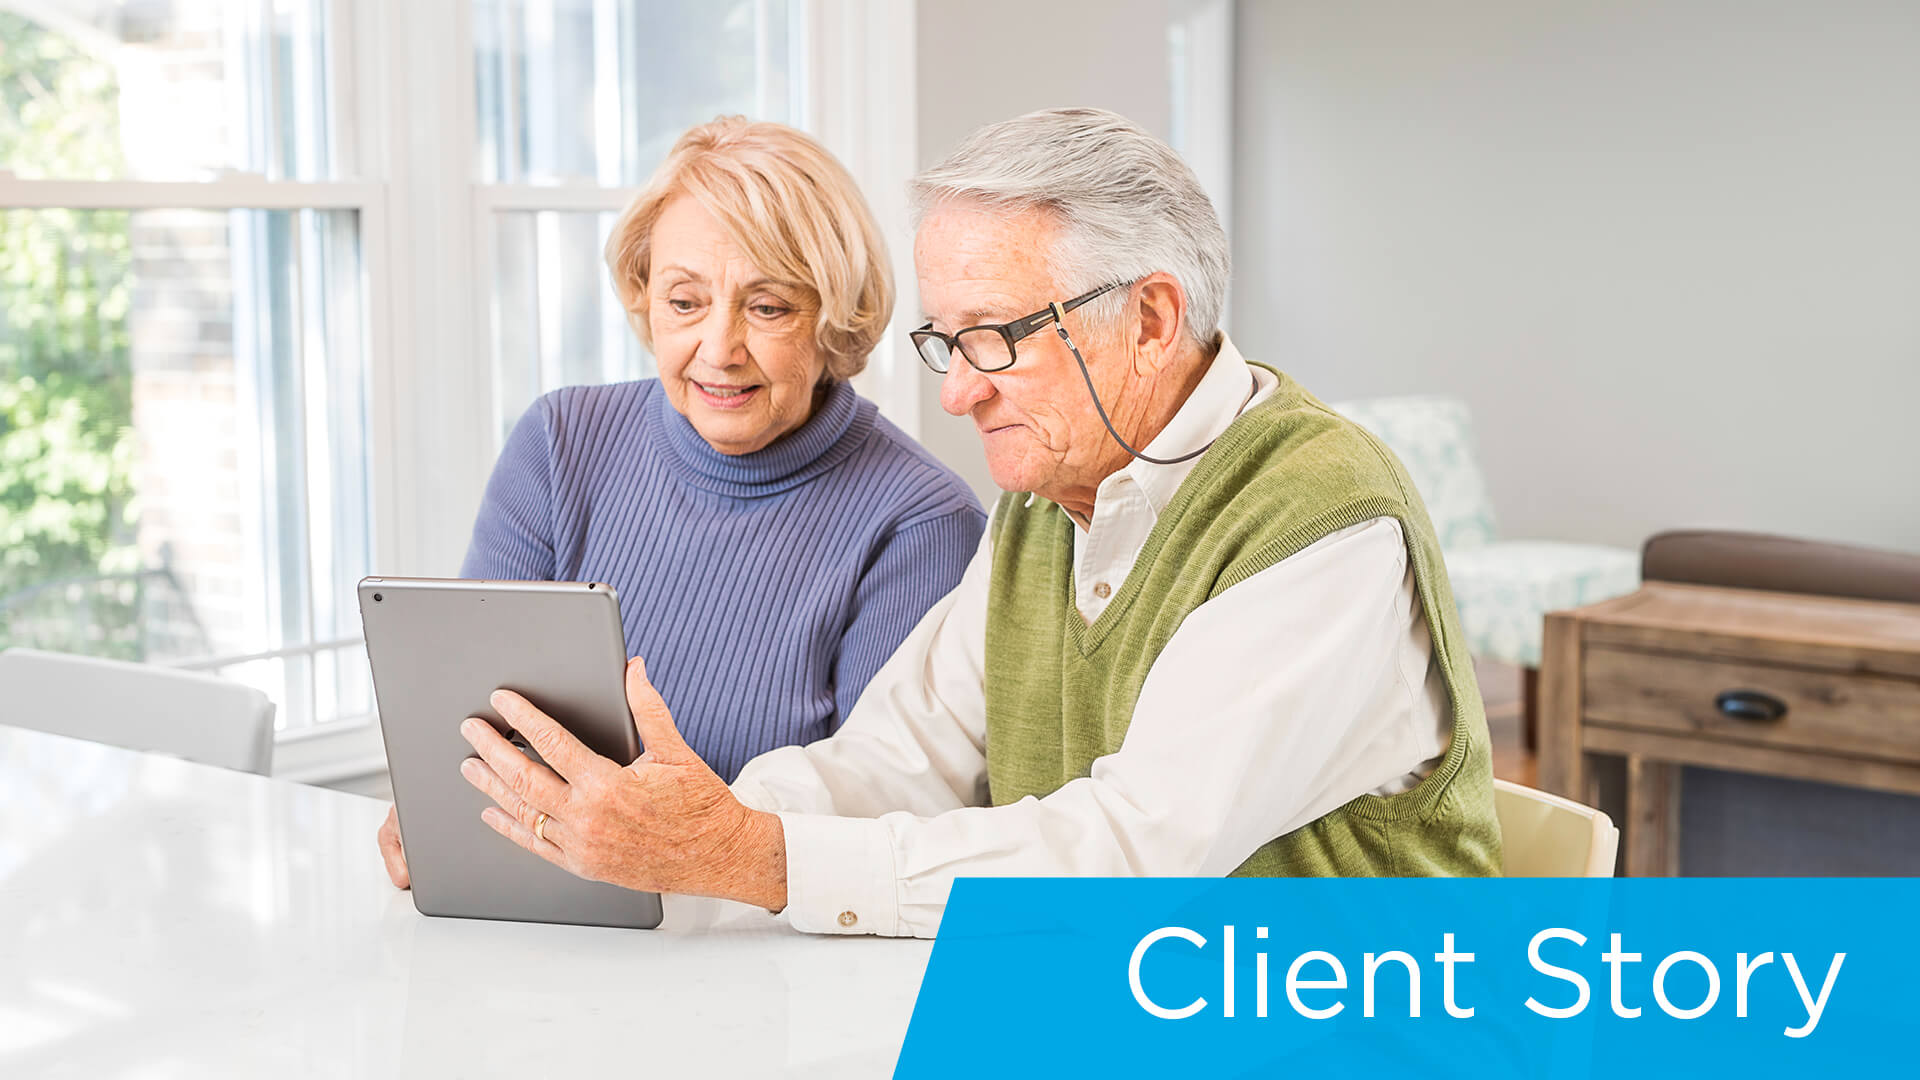 Client-telehealth_elderly couple using tablet for telehealth appointment